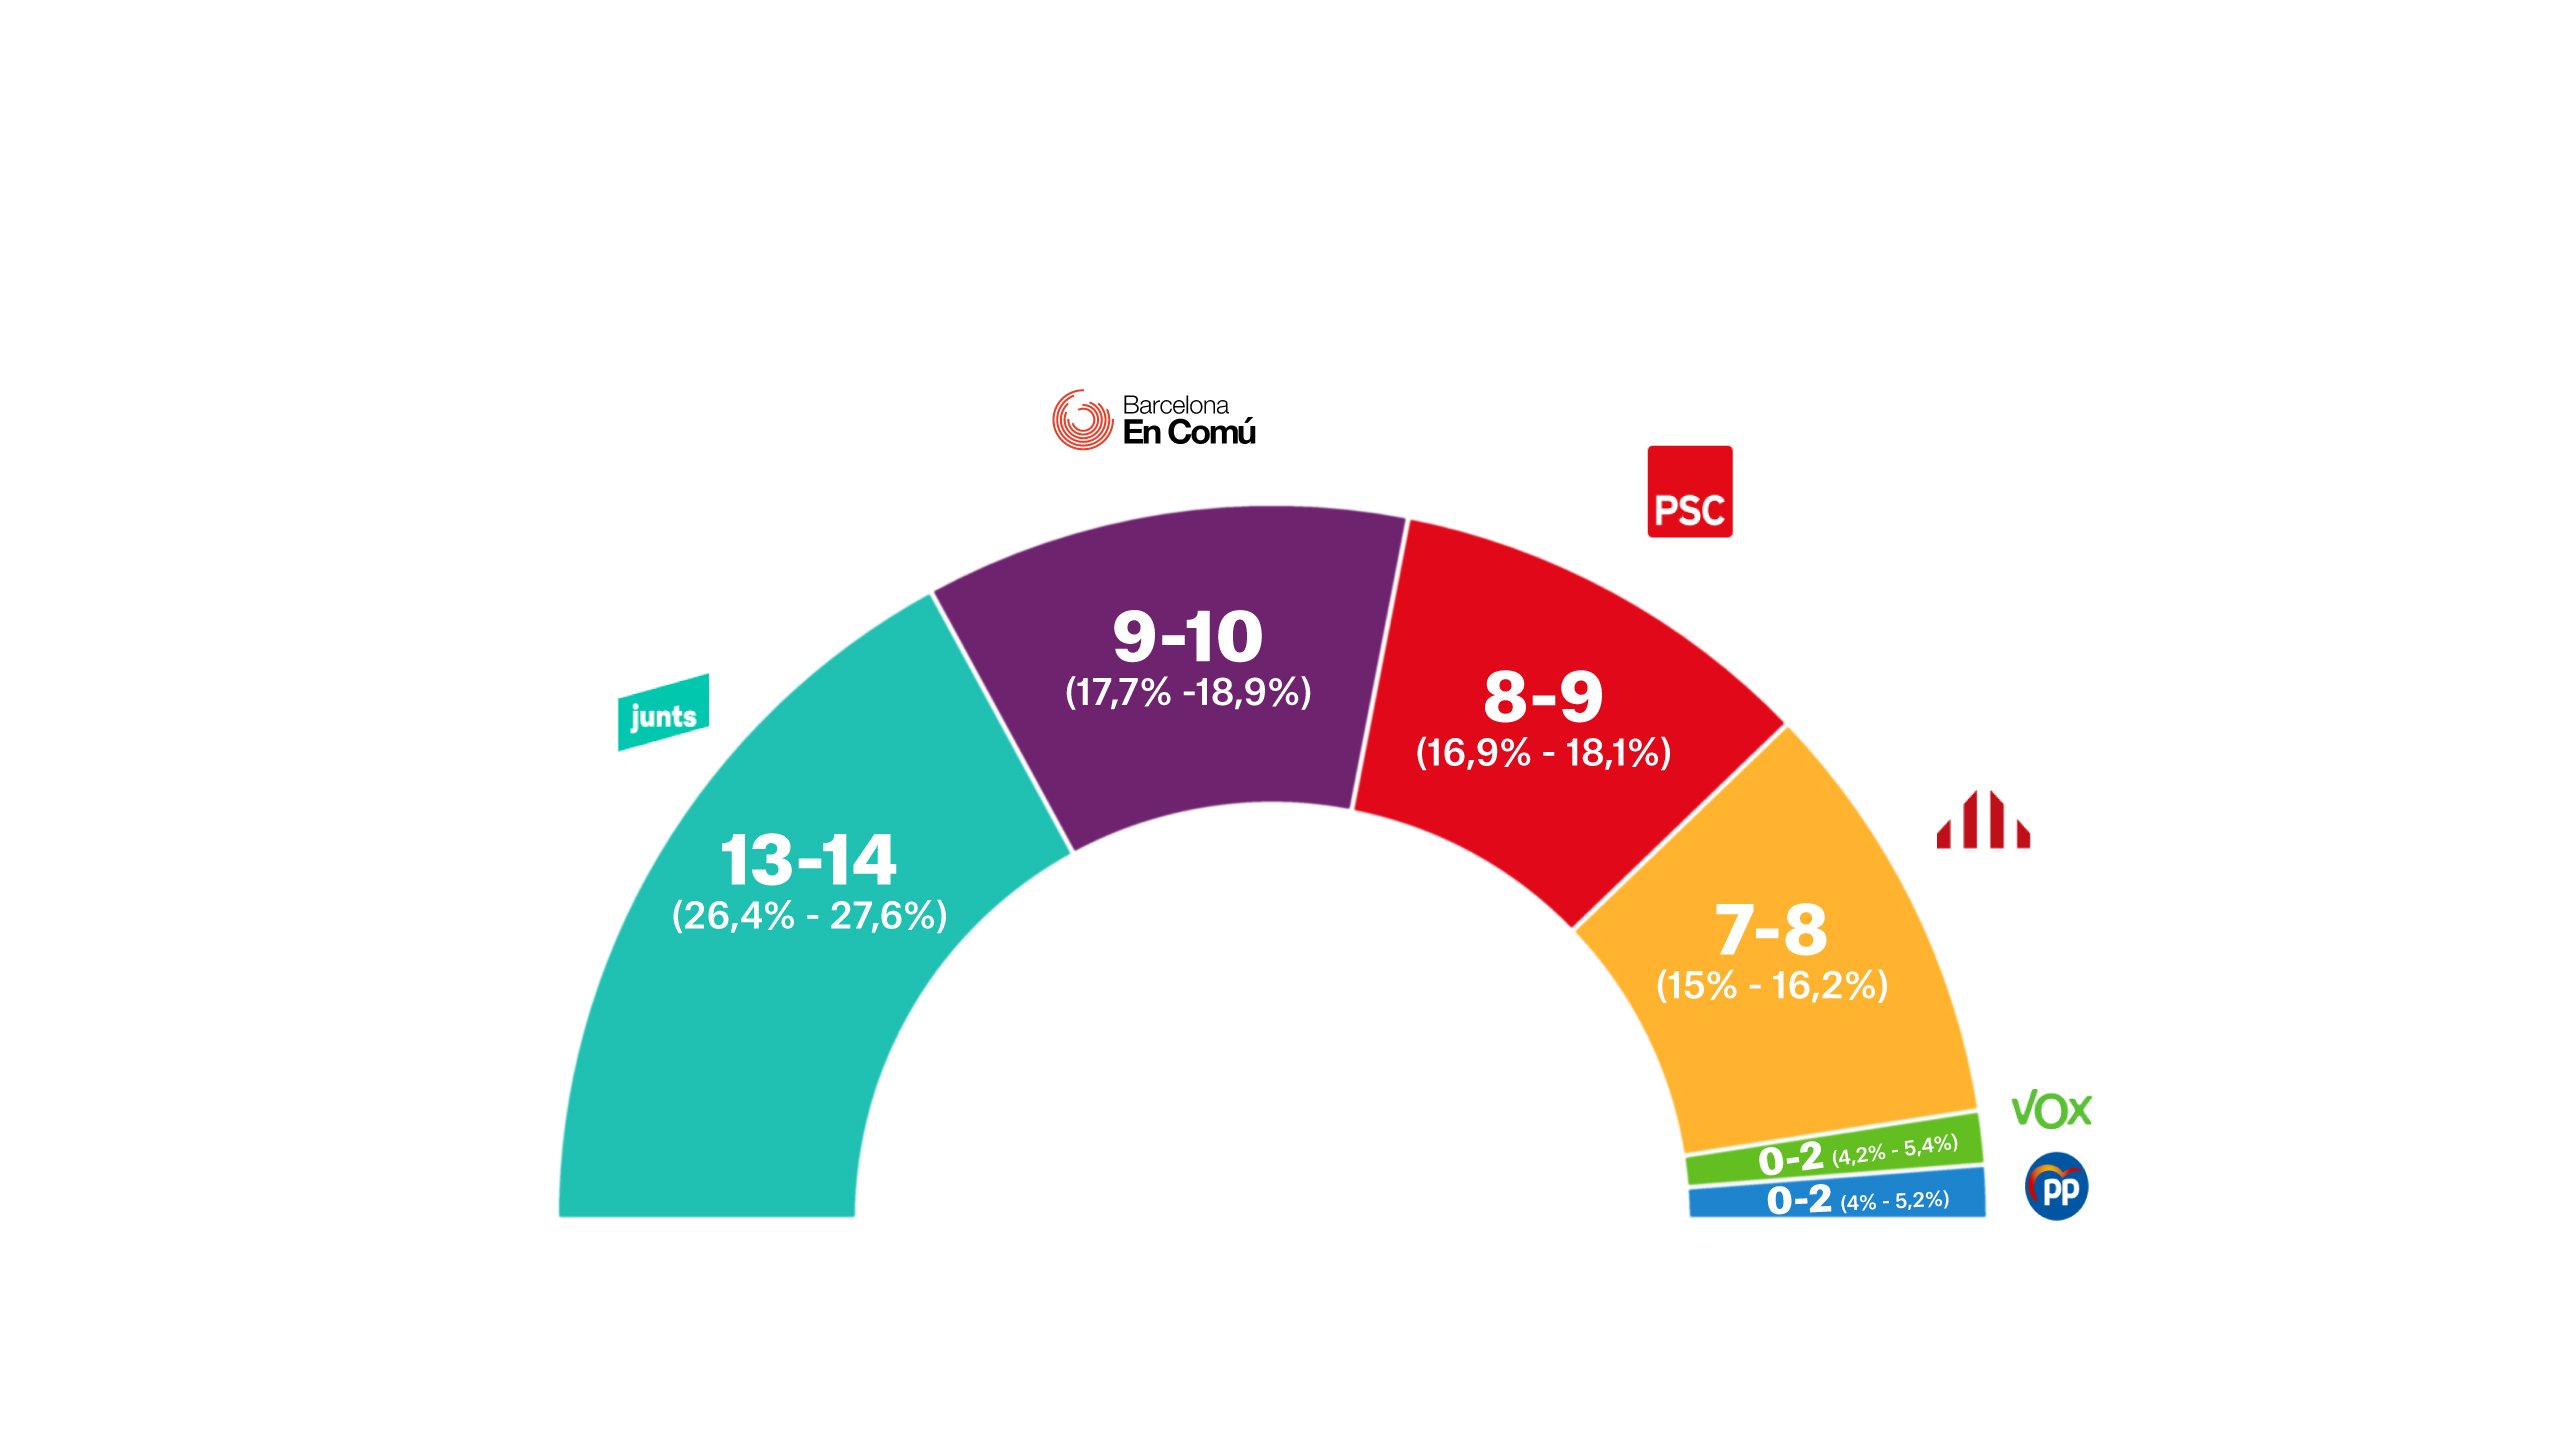 Trias will win Barcelona race, well ahead of Colau, Collboni and Maragall, says Junts poll